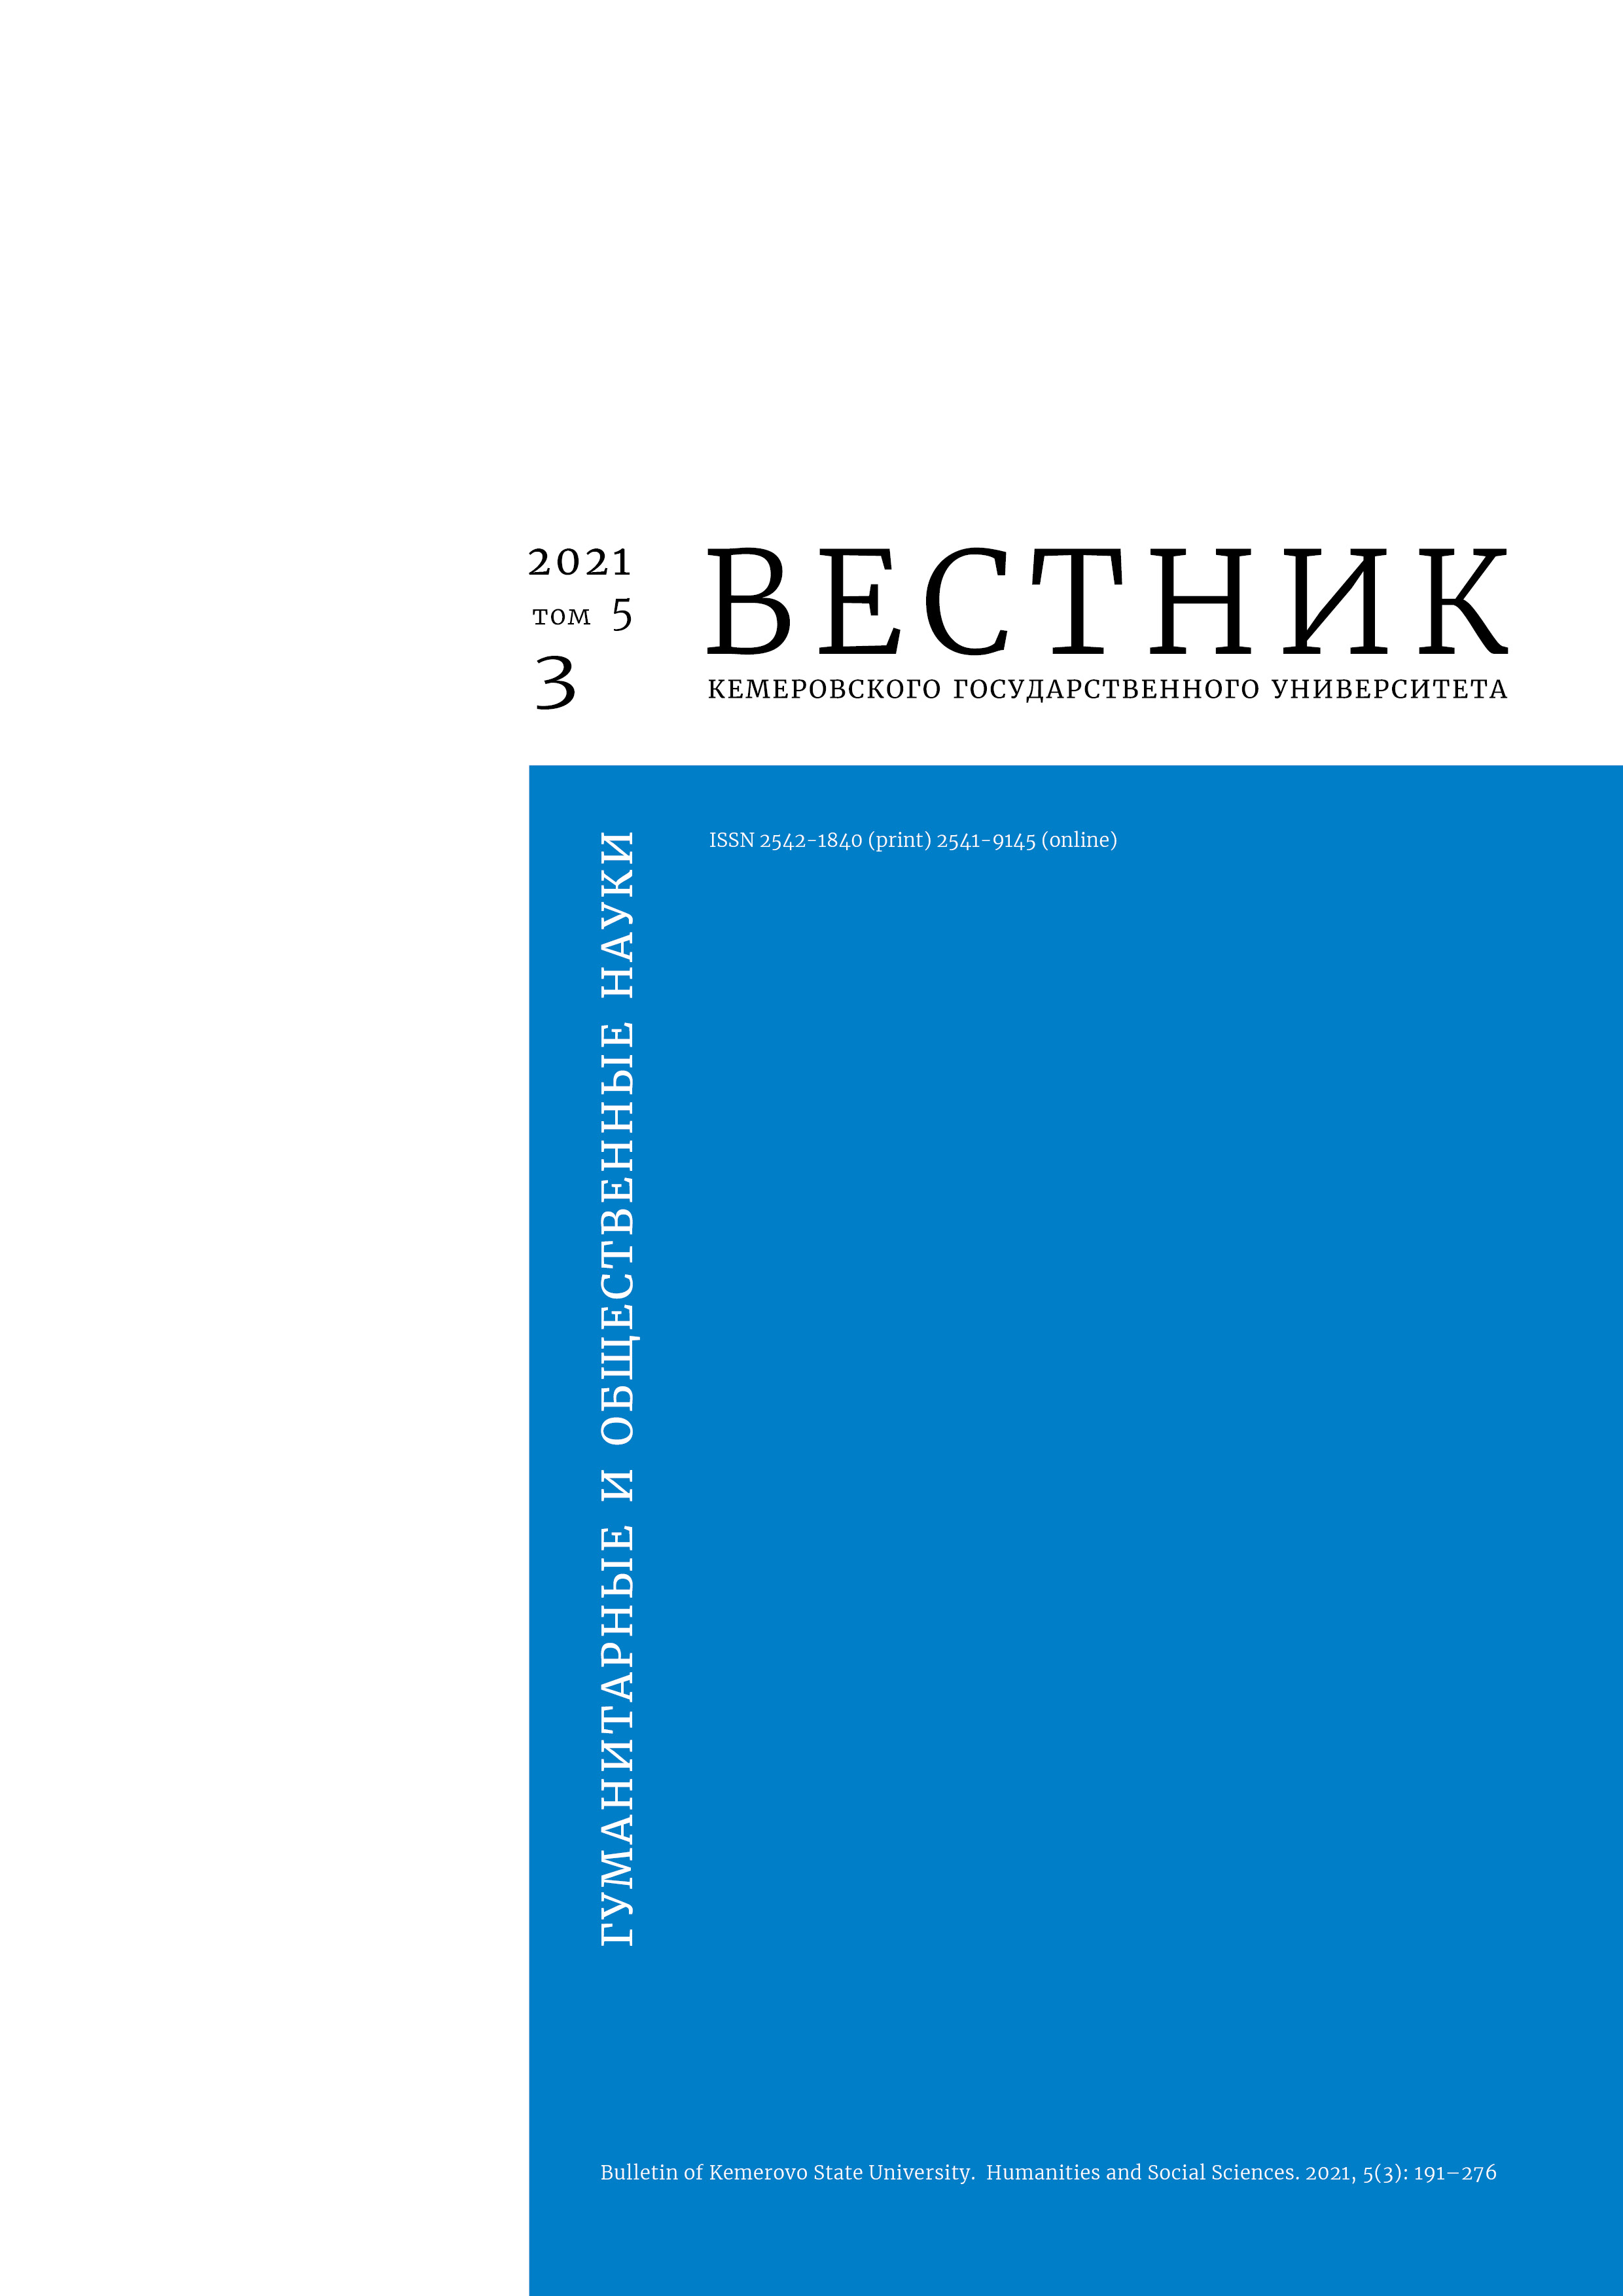                         Bulletin of Kemerovo State University. Series: Humanities and Social Sciences
            